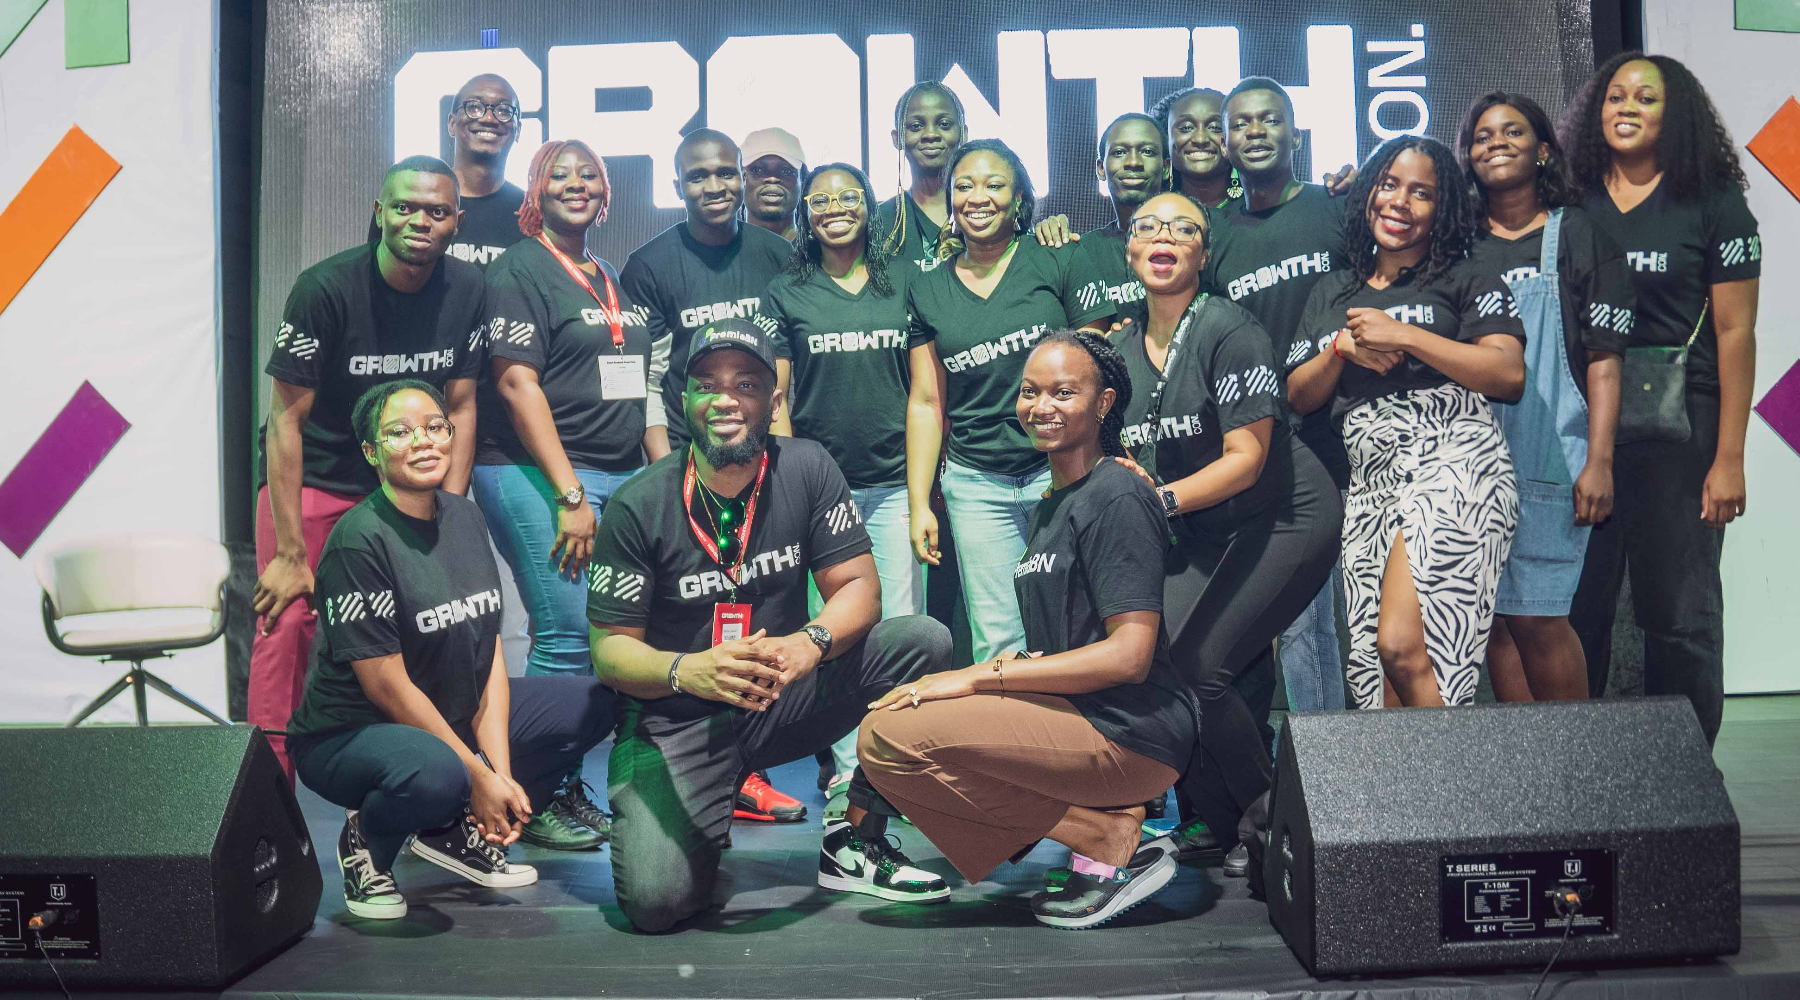 Abdulsamod Balogun and the entire GrowthCon organizing team